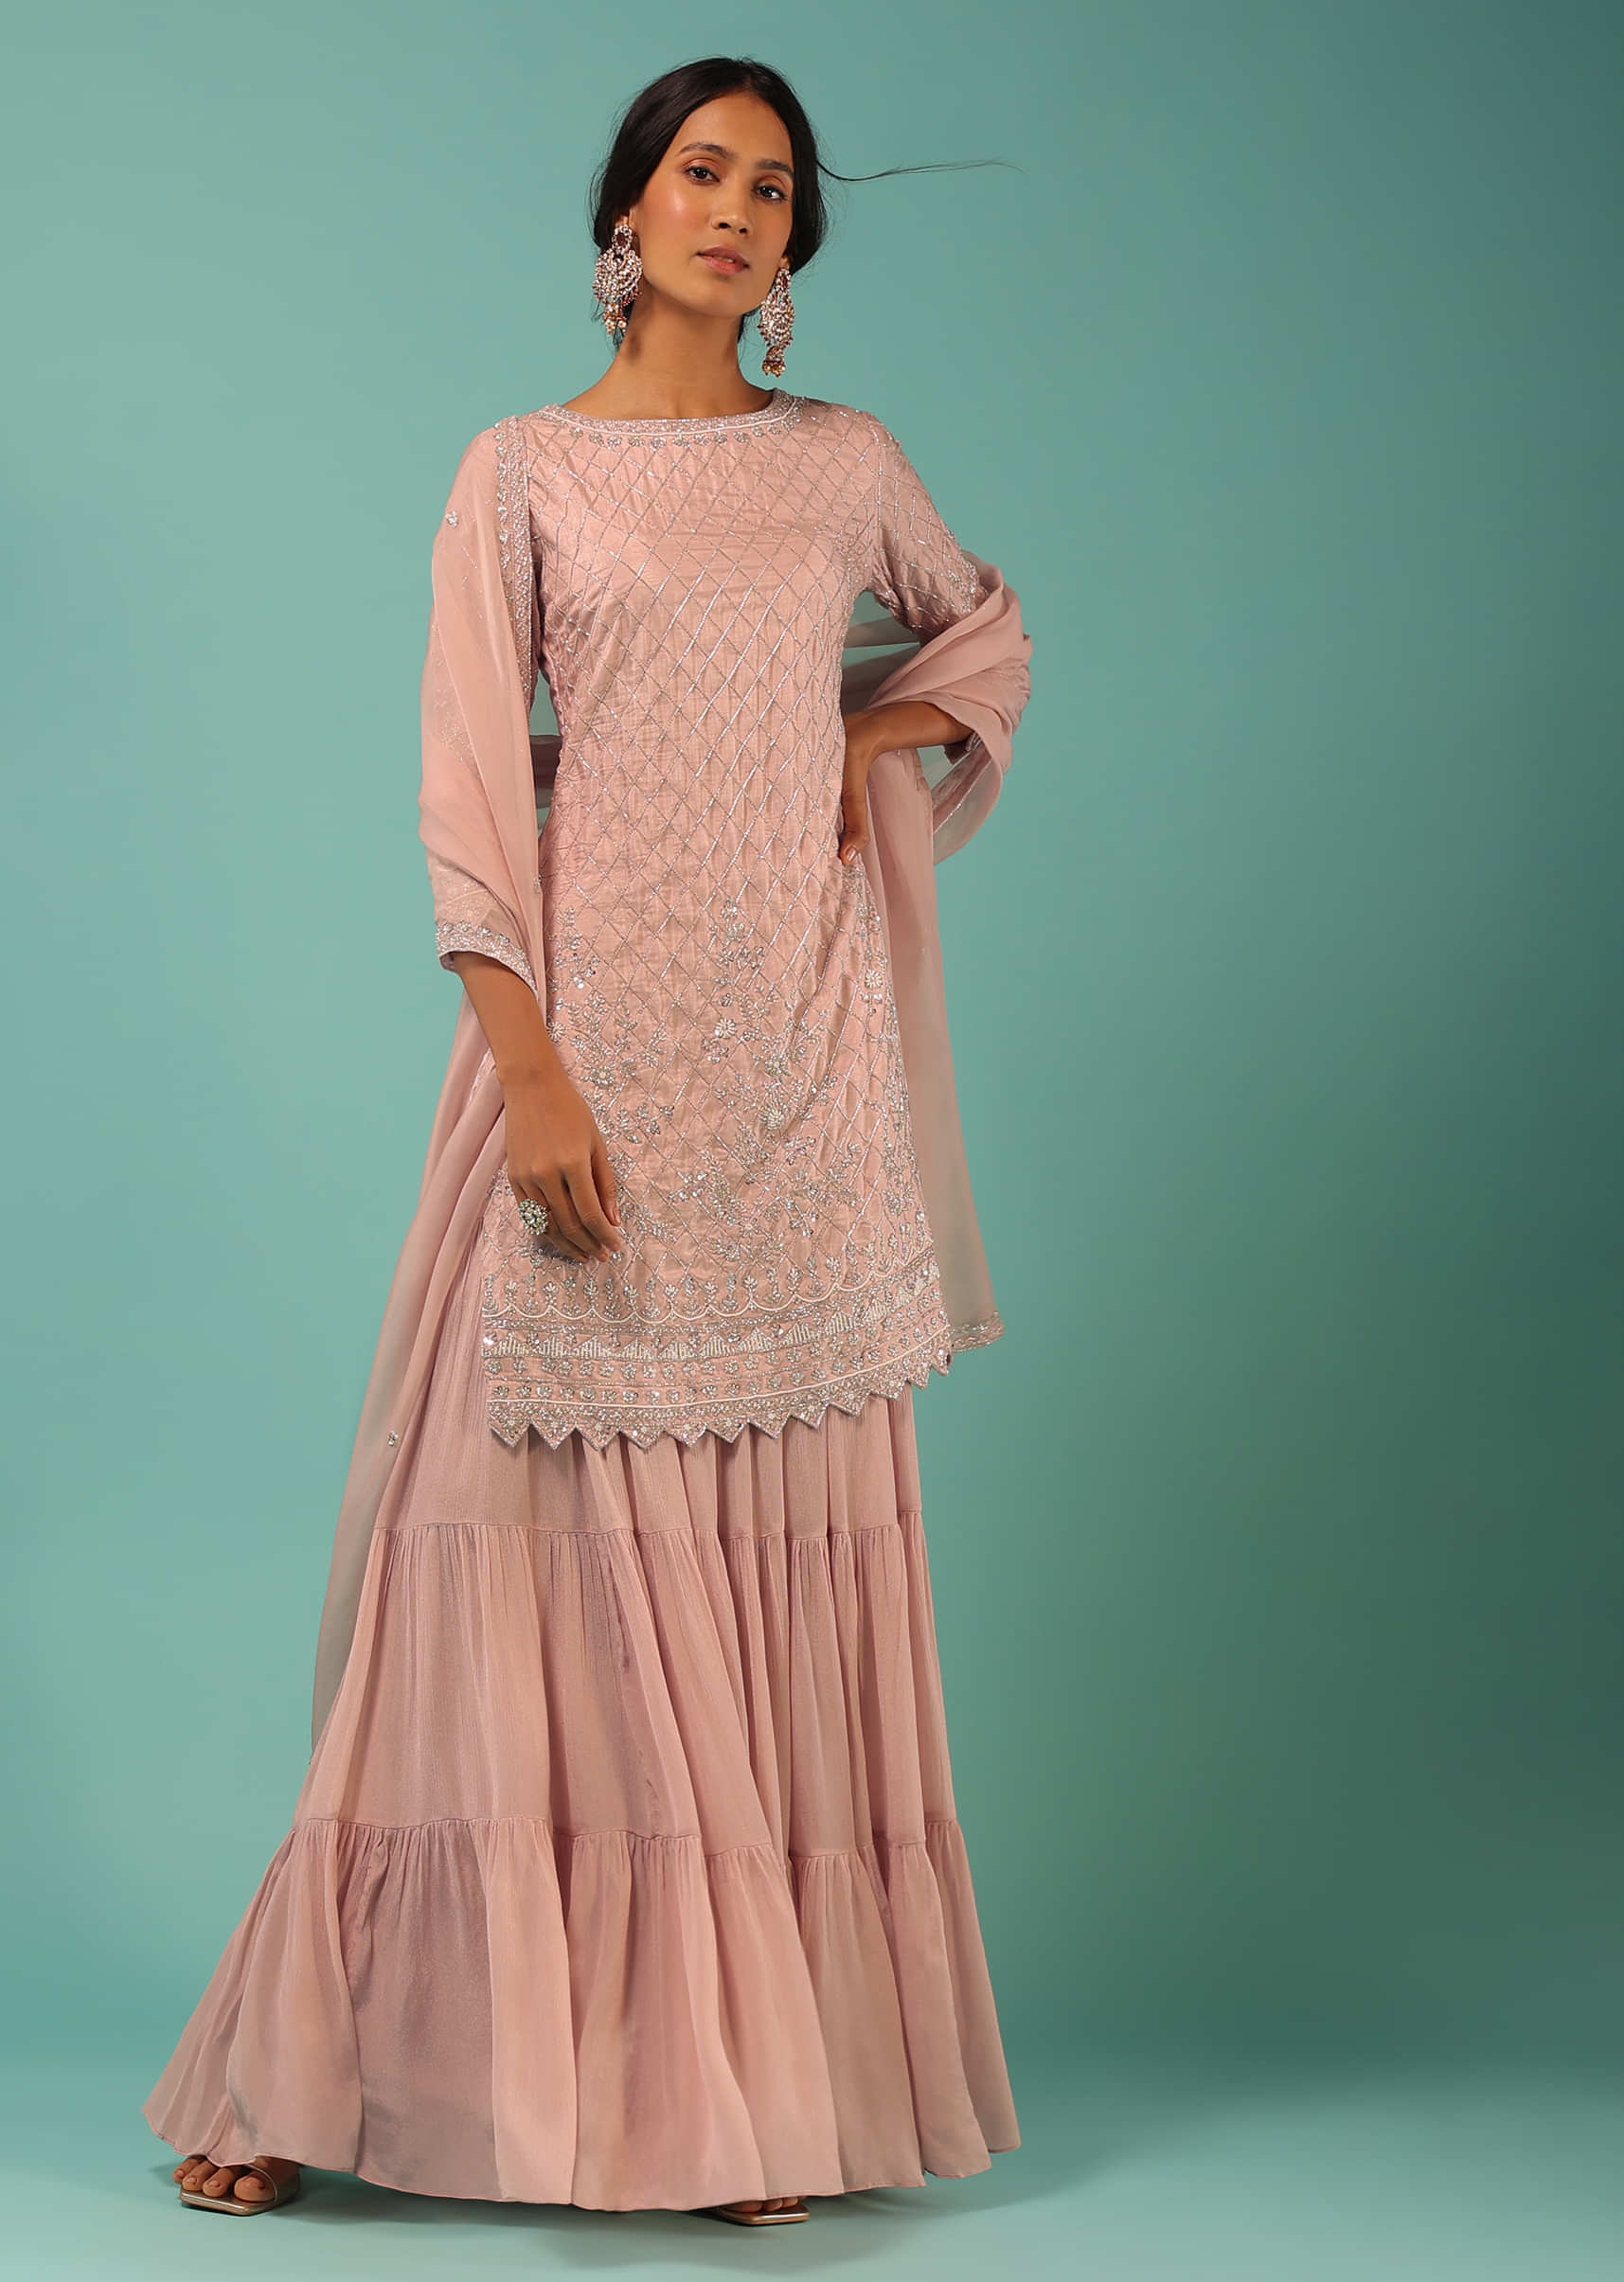 Shell Pink Sharara Suit In Cotton Silk With Cut Dana Embroidered Mesh And Moti Detailed Delicate Floral Motifs